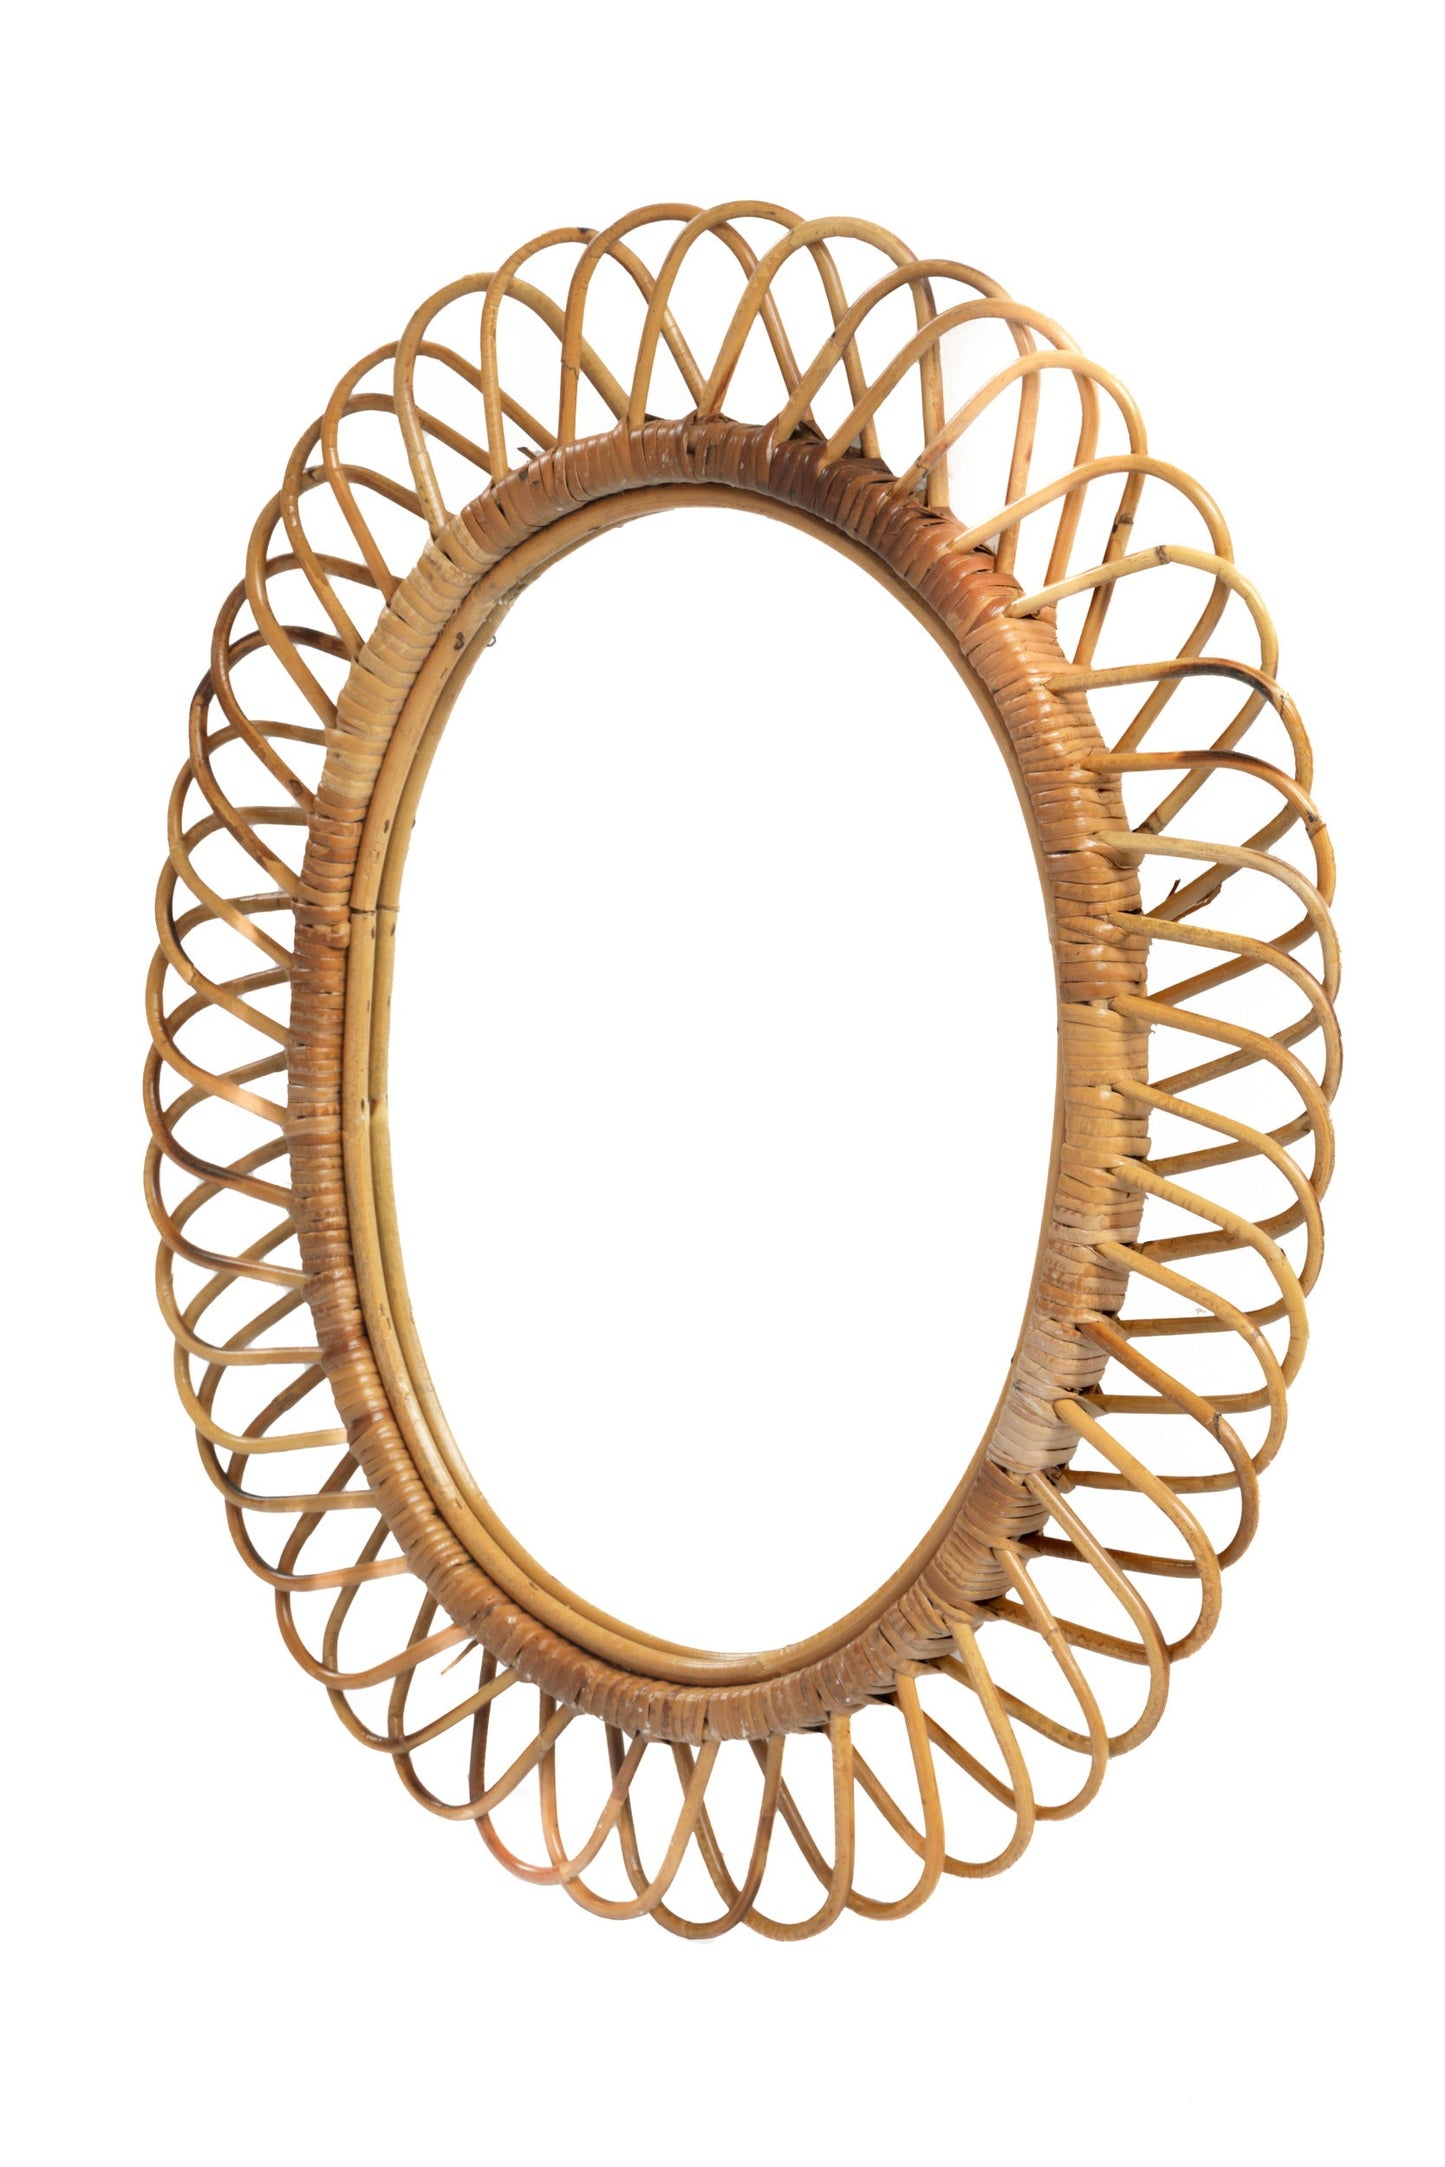 Oval natural rattan mirror from the 70s